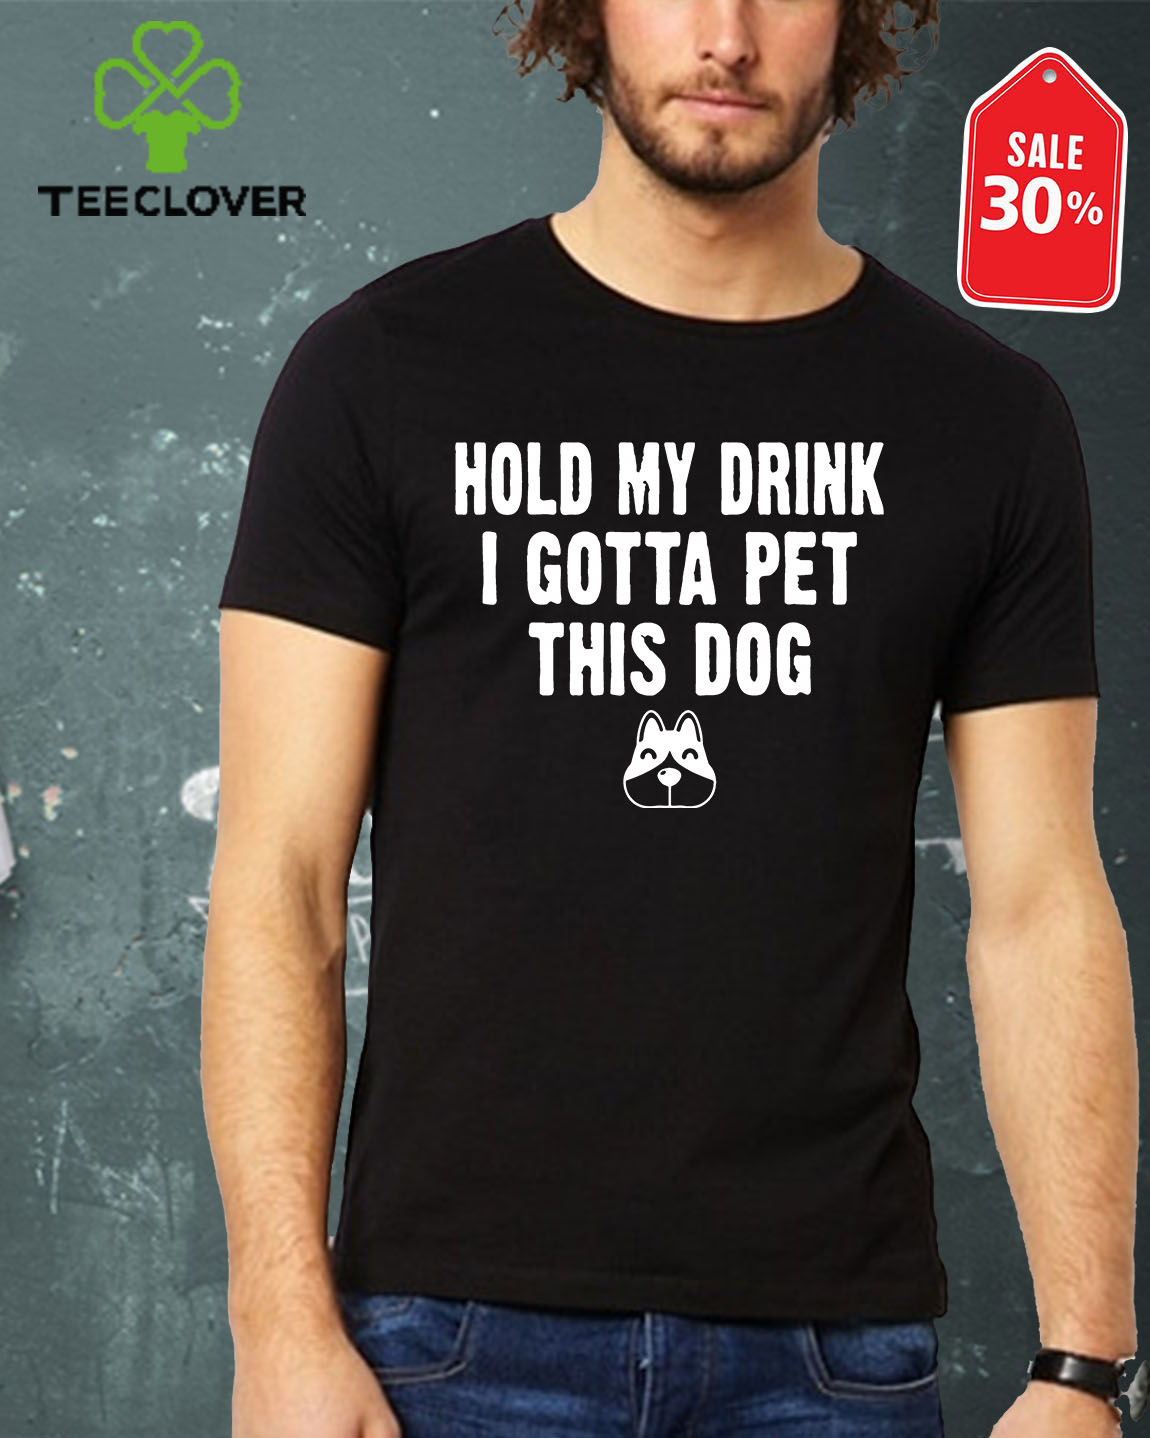 Hold My Drink I Gotta Pet This Dog T-shirt Funny Humor Gift